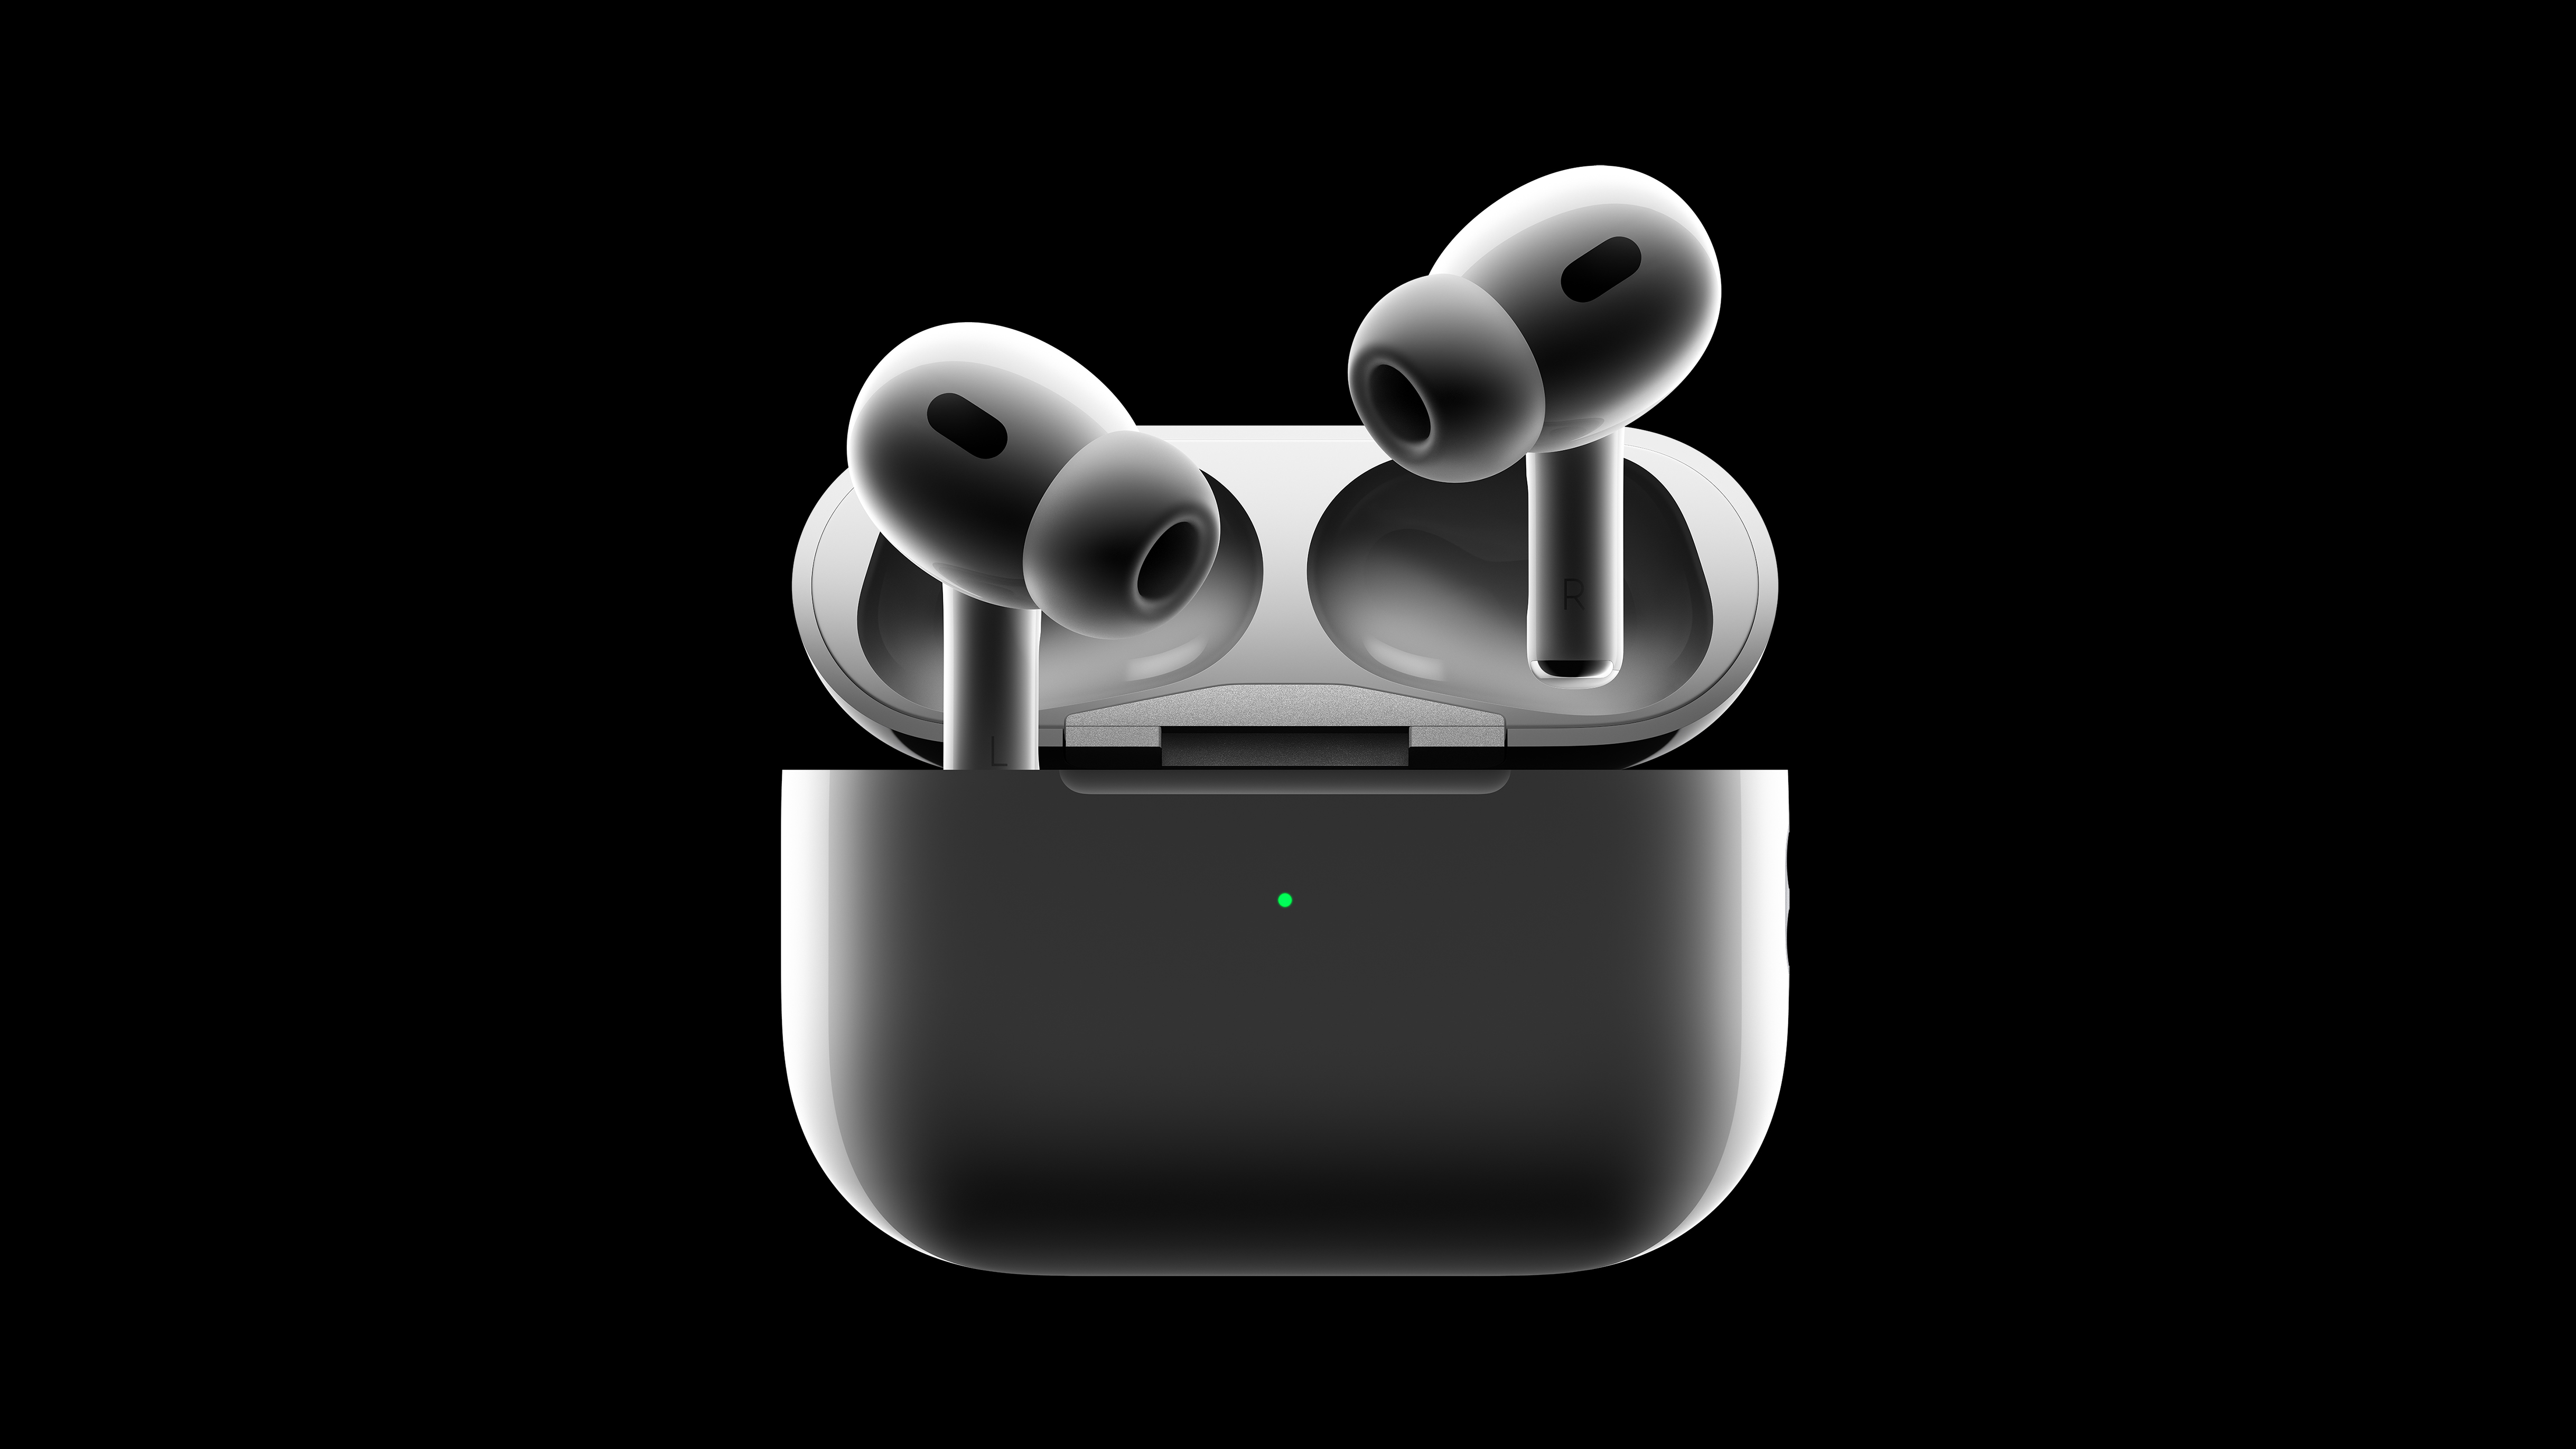 AirPods Pro 2 buds extending from the case on a black background